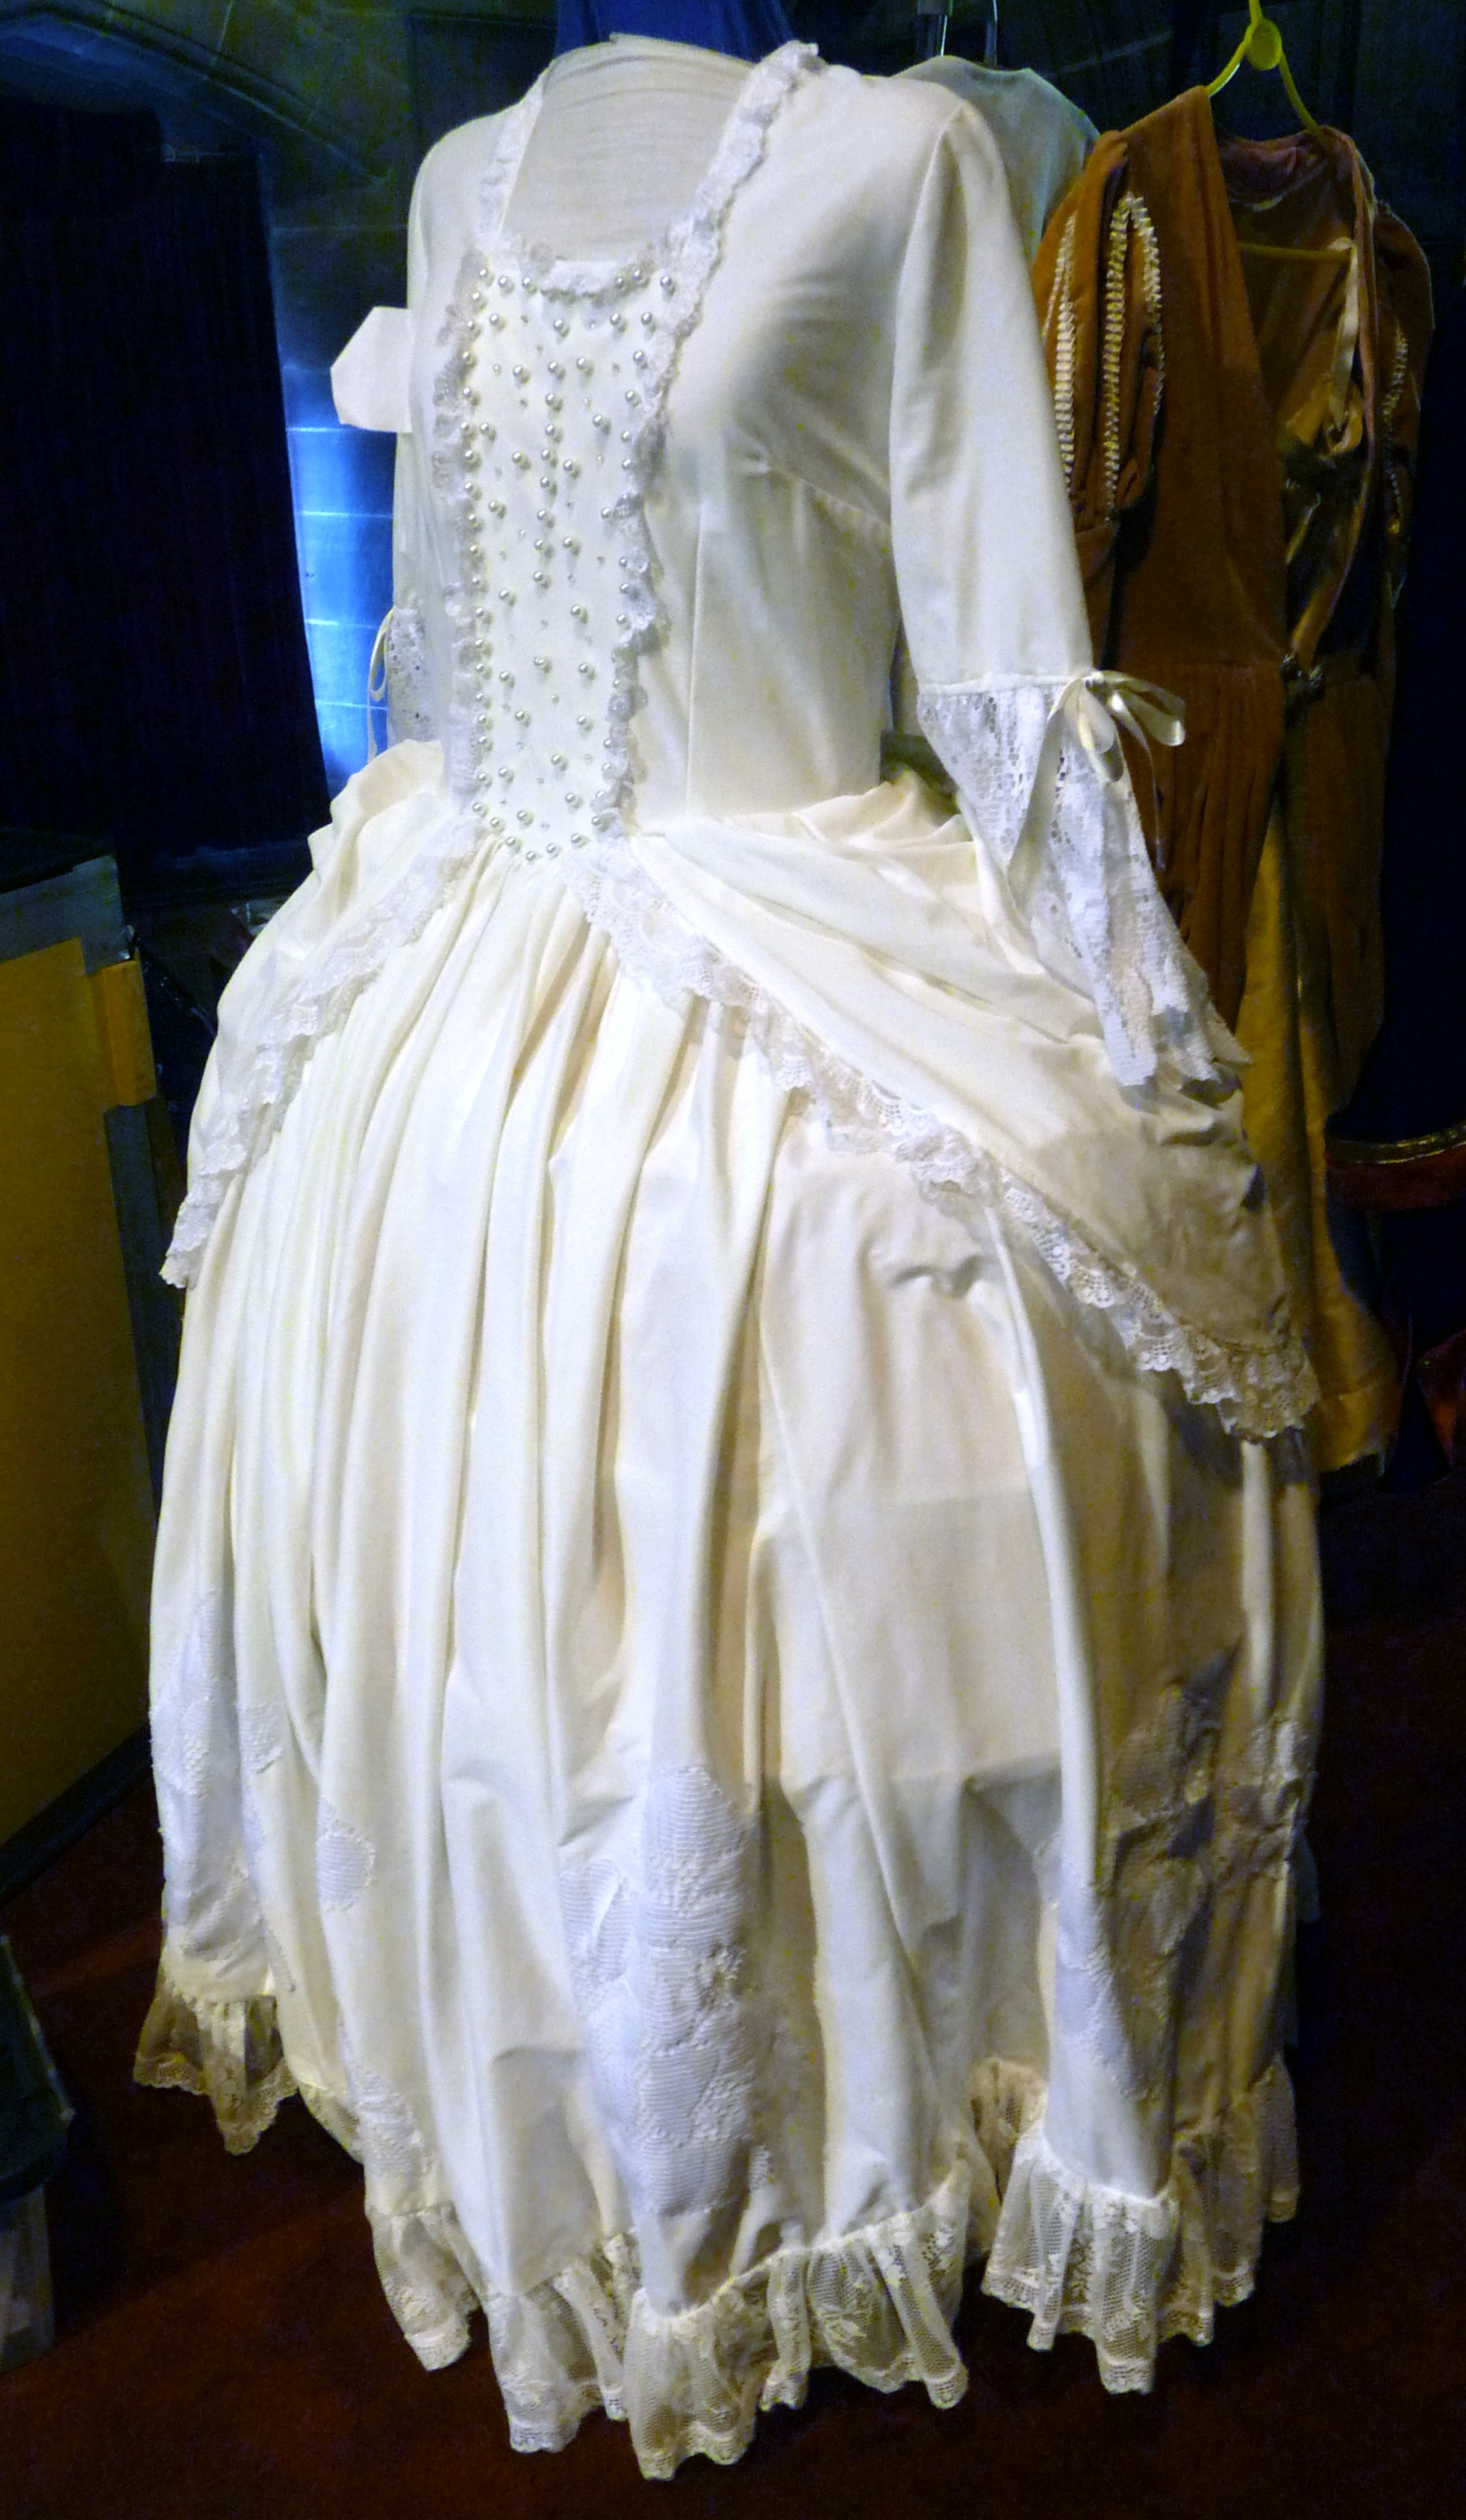 costume from "A Winter's Tale", a play performed by HAND IN HAND THEATRE Co